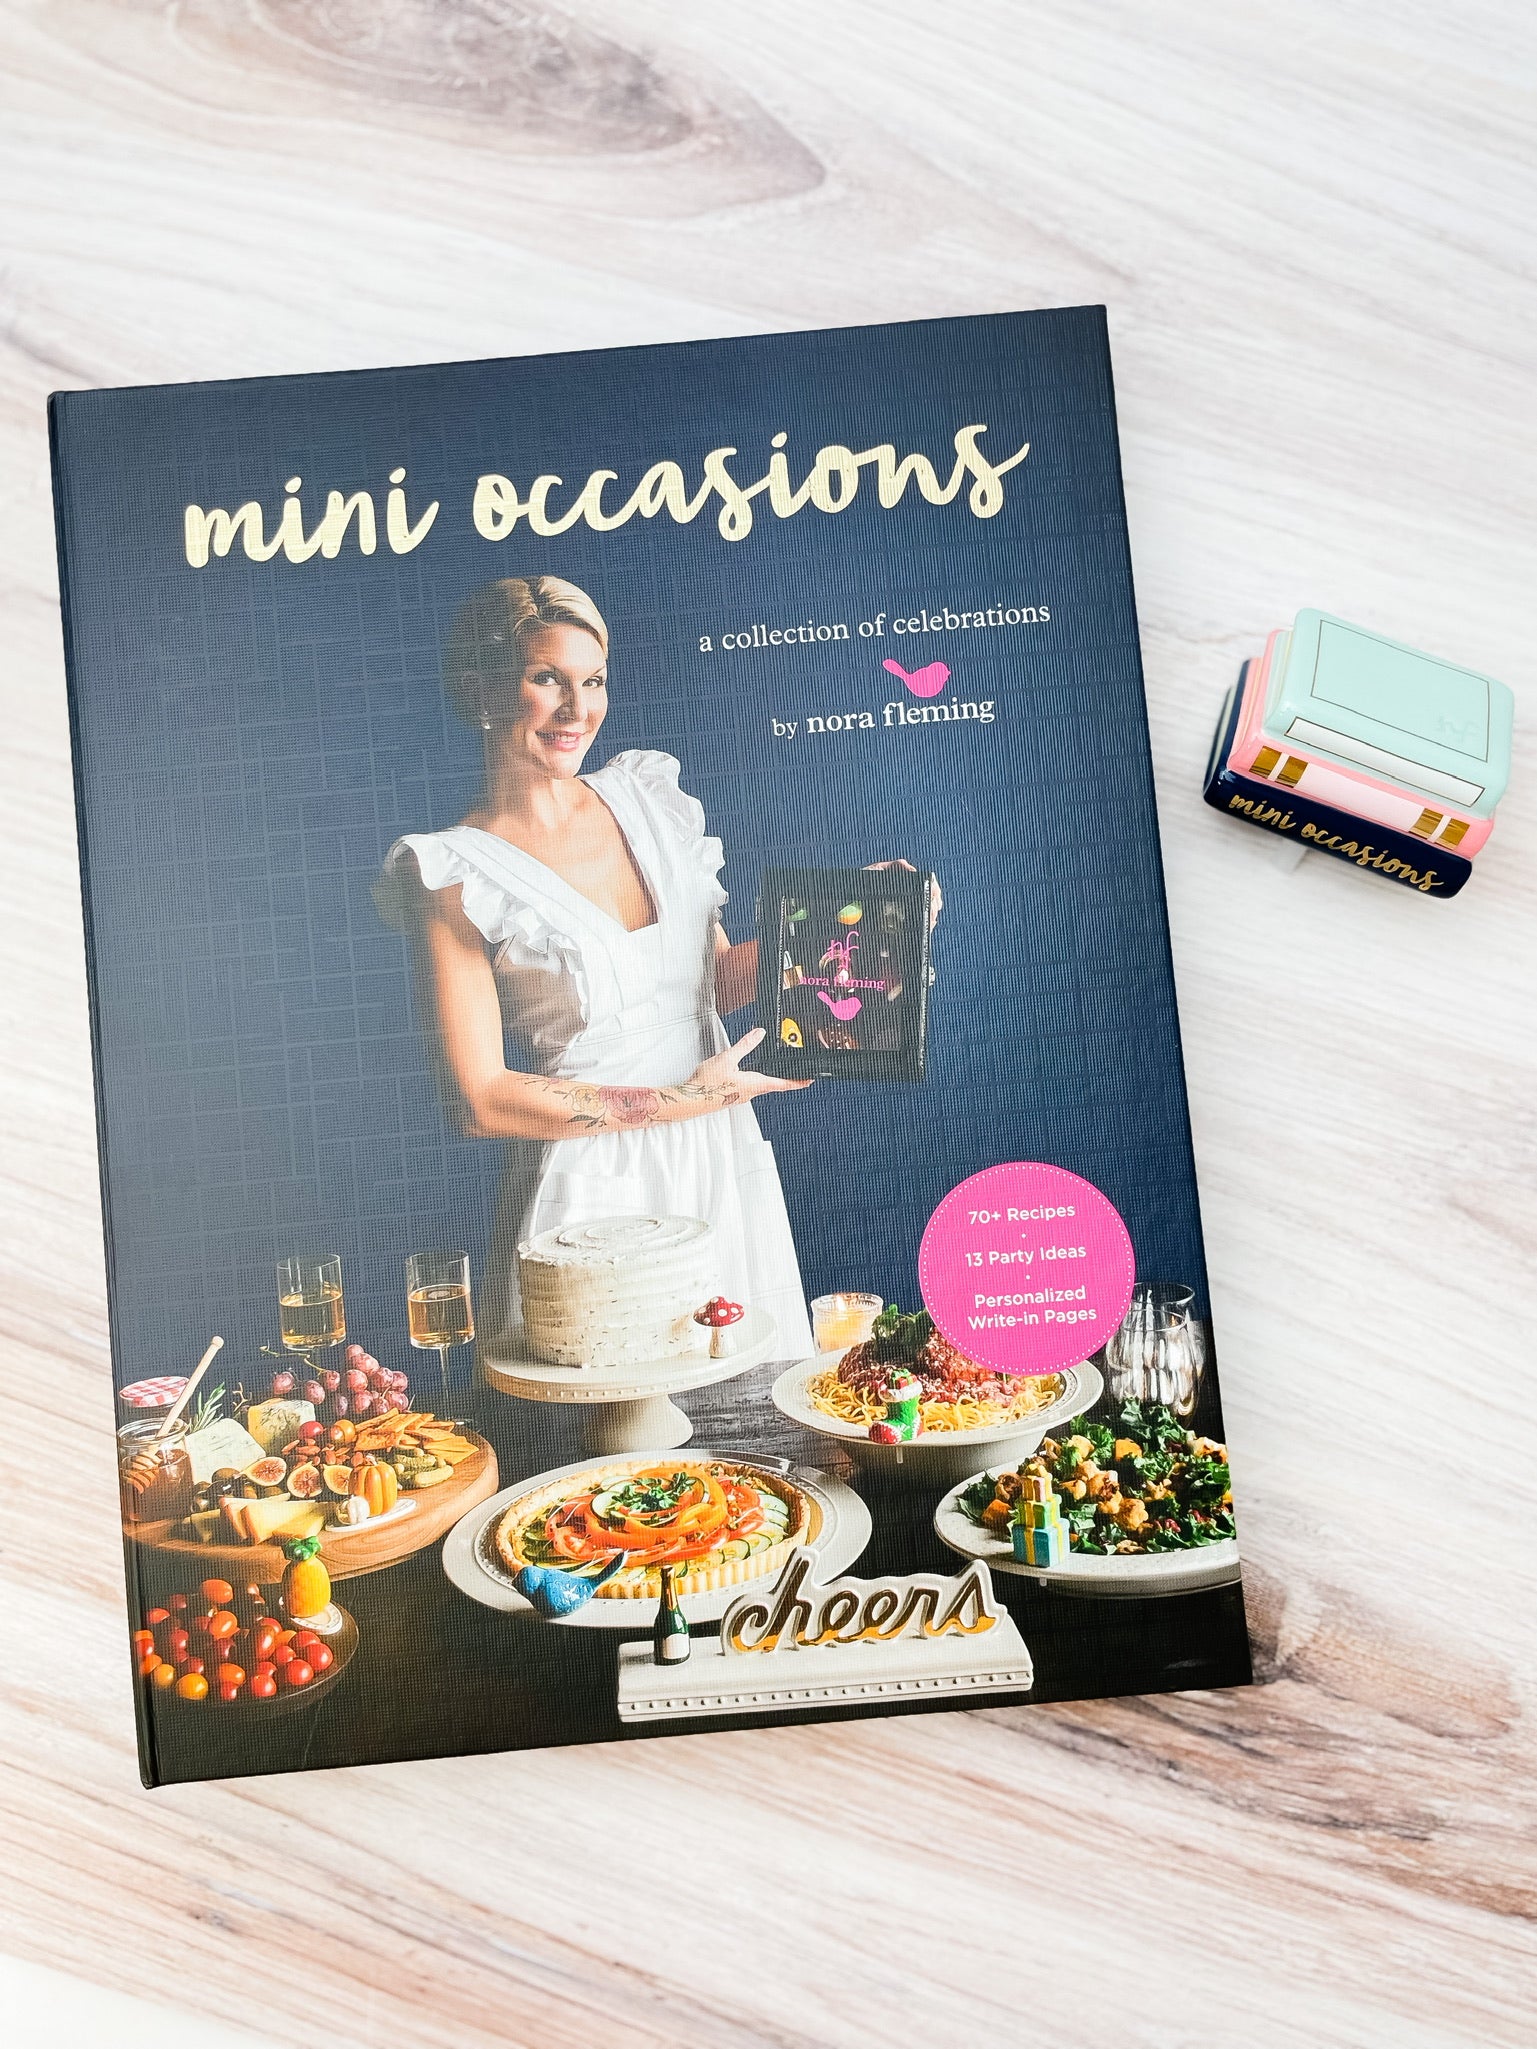 Mini Occasions Cook Book with Mini by Nora Fleming